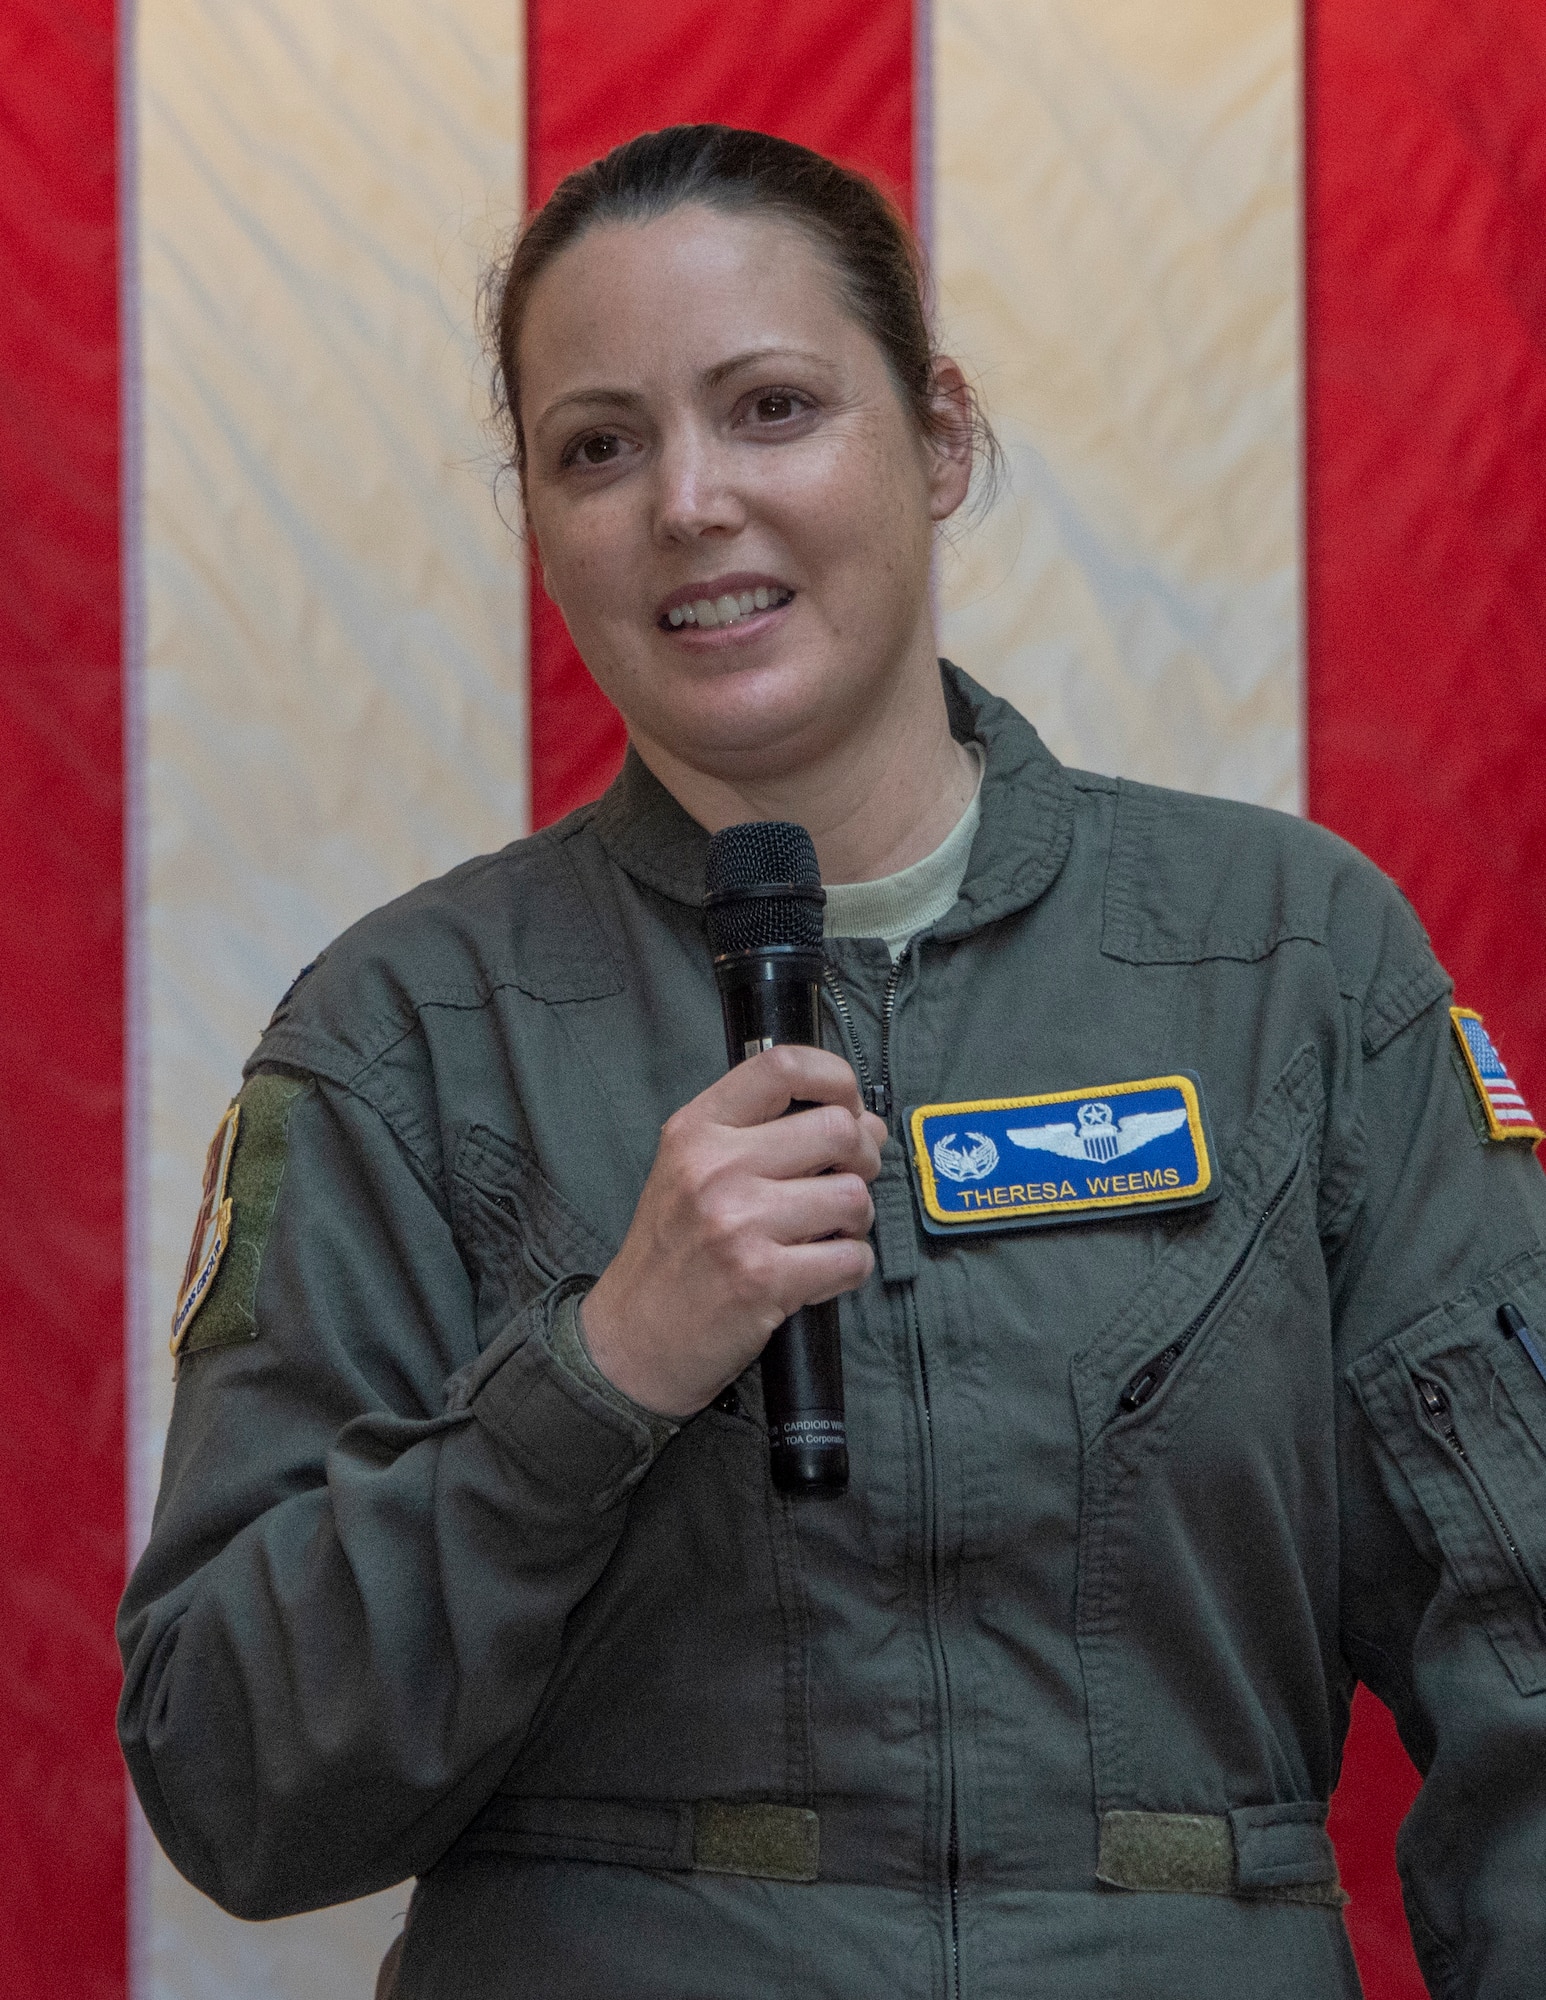 U.S. Air Force Col. Theresa Weems, 60th Operations Group commander, delivers remarks during the Women’s History Month social gathering, March 20, 2019, at Travis Air Force Base, California. Since 1987, the month of March has been designated to celebrate the historical and ongoing achievements and contributions of women. Members of the Women Inspiring the Next Generation’s Success committee were responsible for organizing the event which included an exhibit highlighting extraordinary female heroes and featured speakers prominent in the Travis community.  (U.S. Air Force photo by Heide Couch)